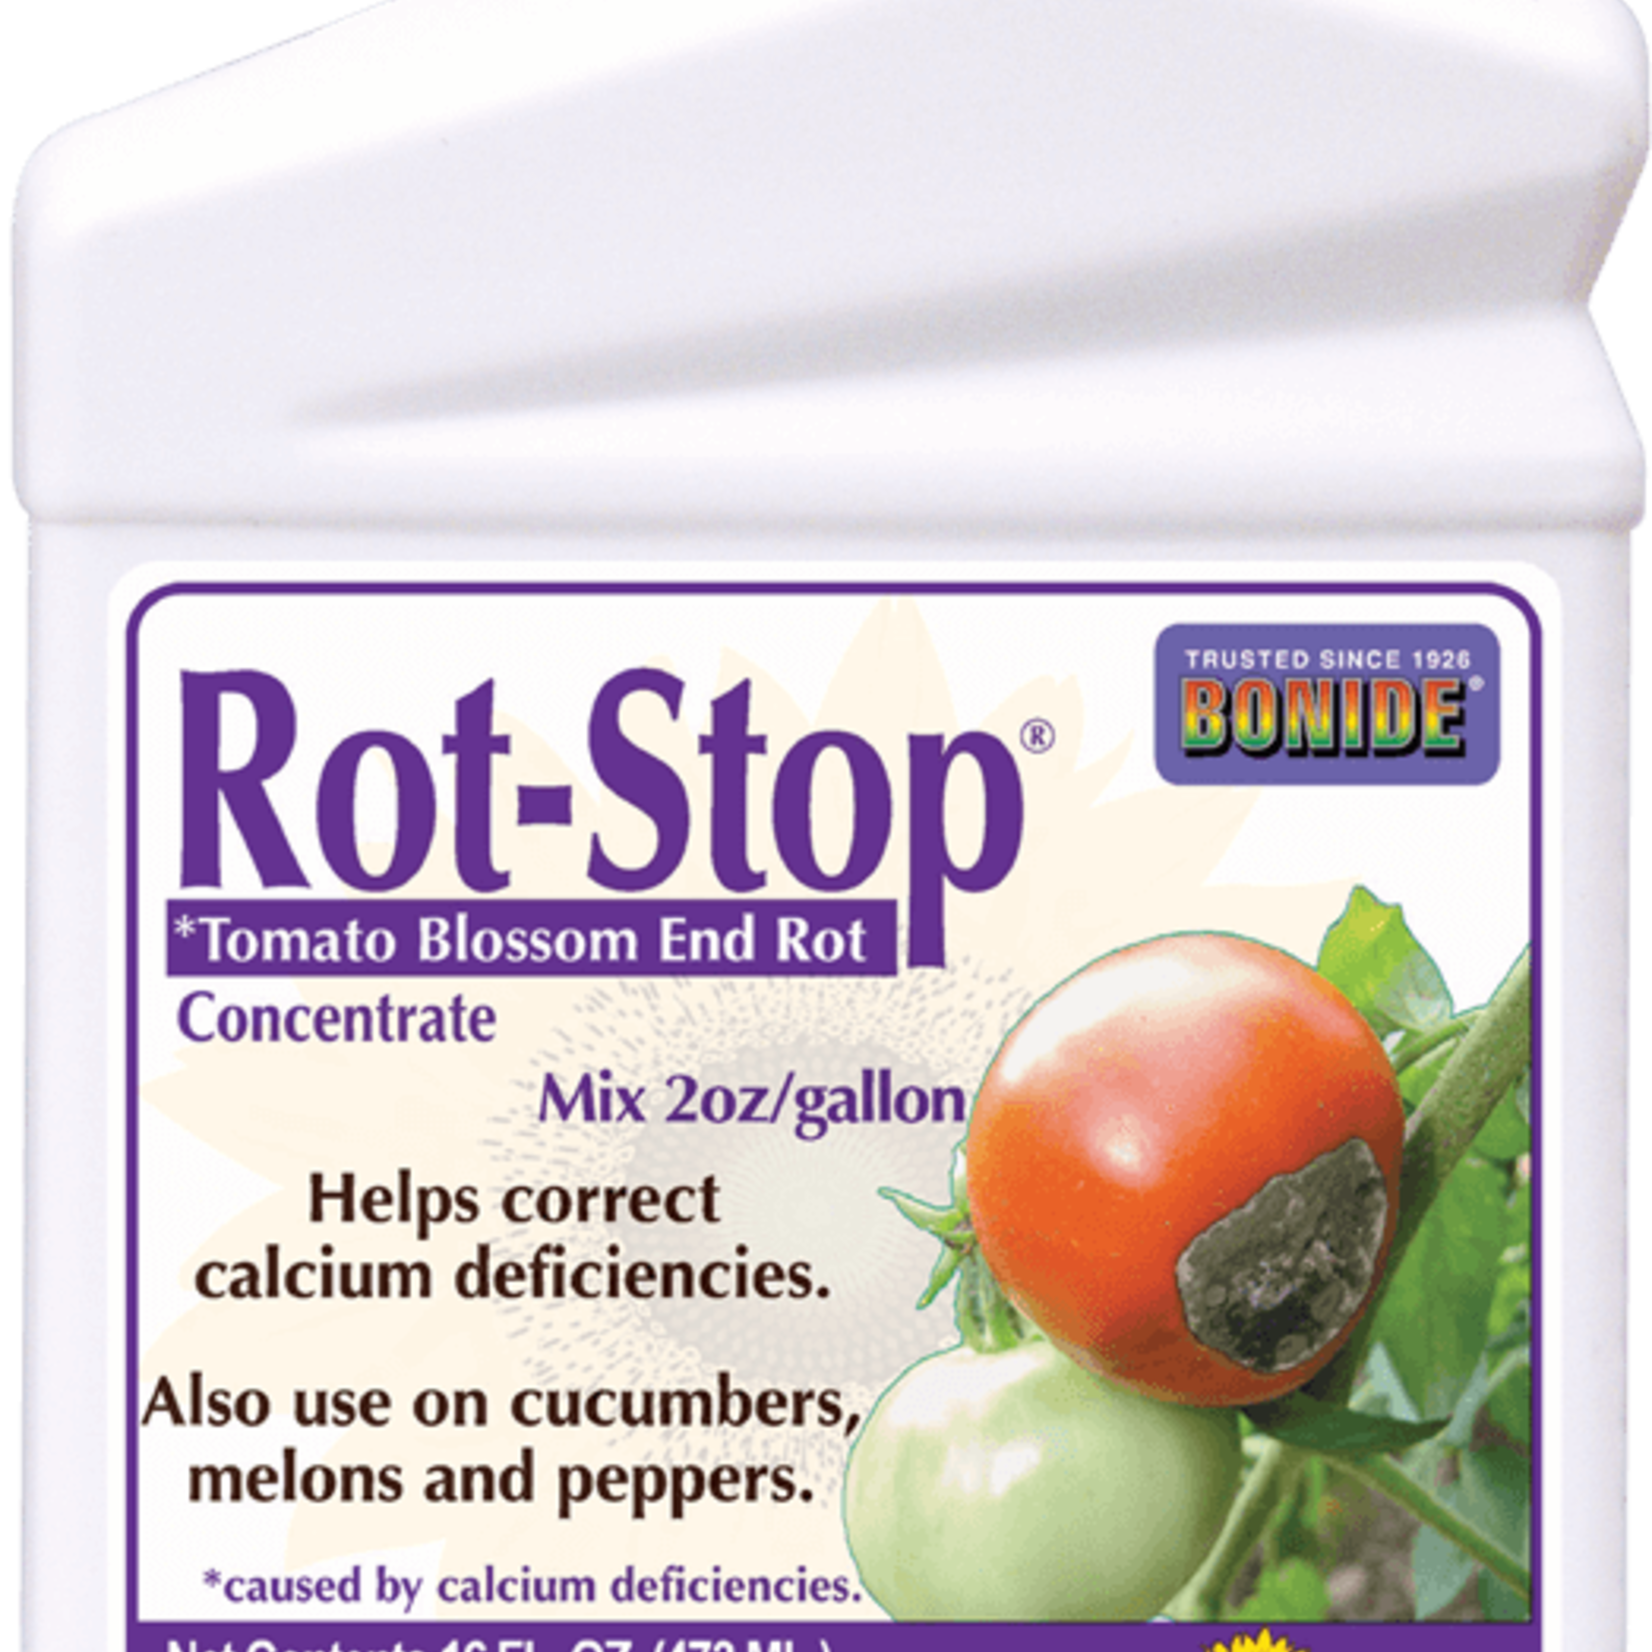 Bonide Rot-Stop concentrate 16 oz.